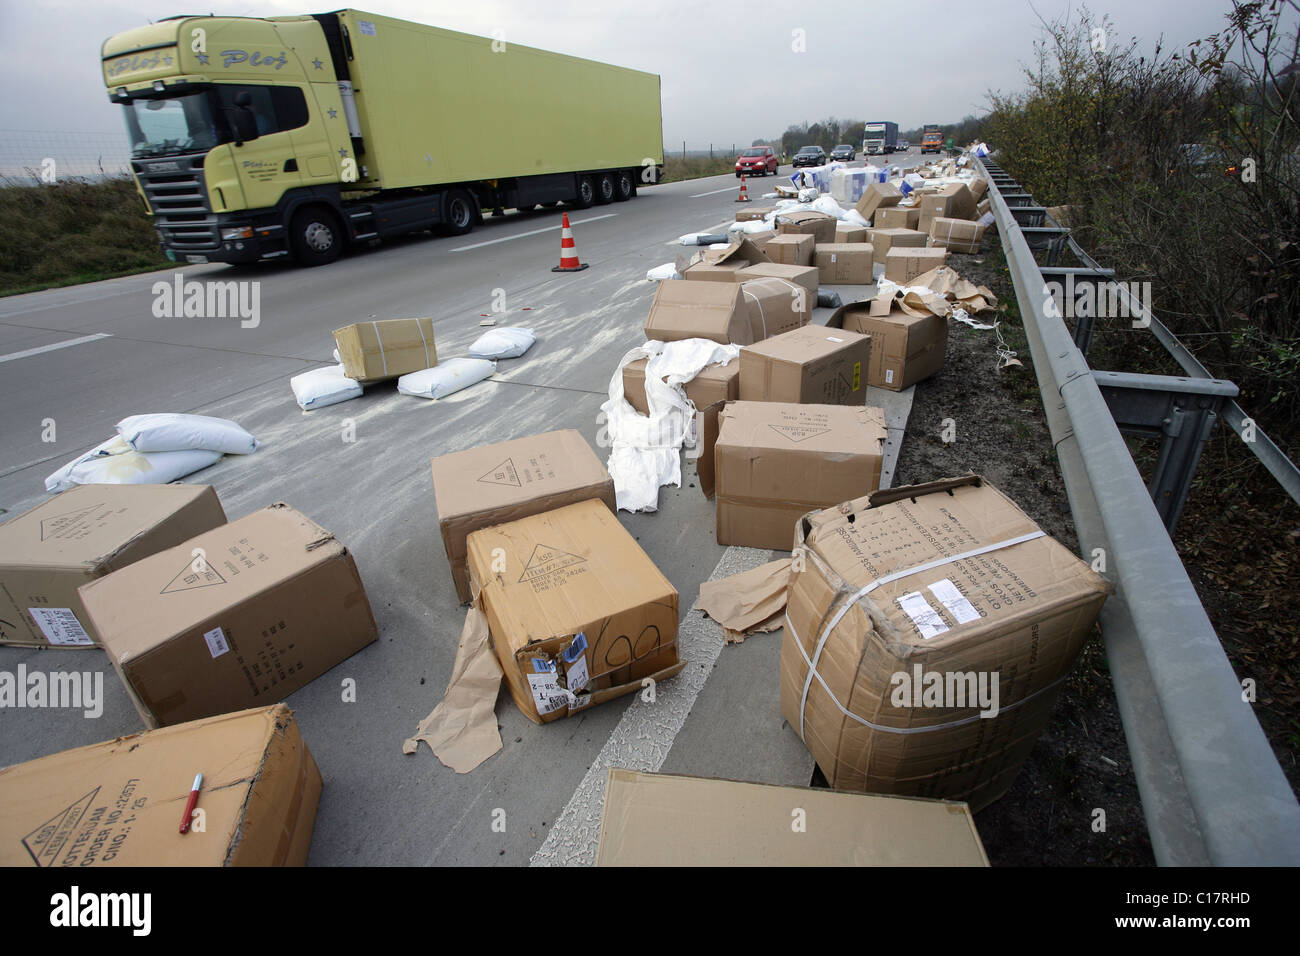 A truck that has lost its load on the Autobahn 61 between Mendig and Kruft, Mendig, Rhineland-Palatinate, Germany, Europe Stock Photo